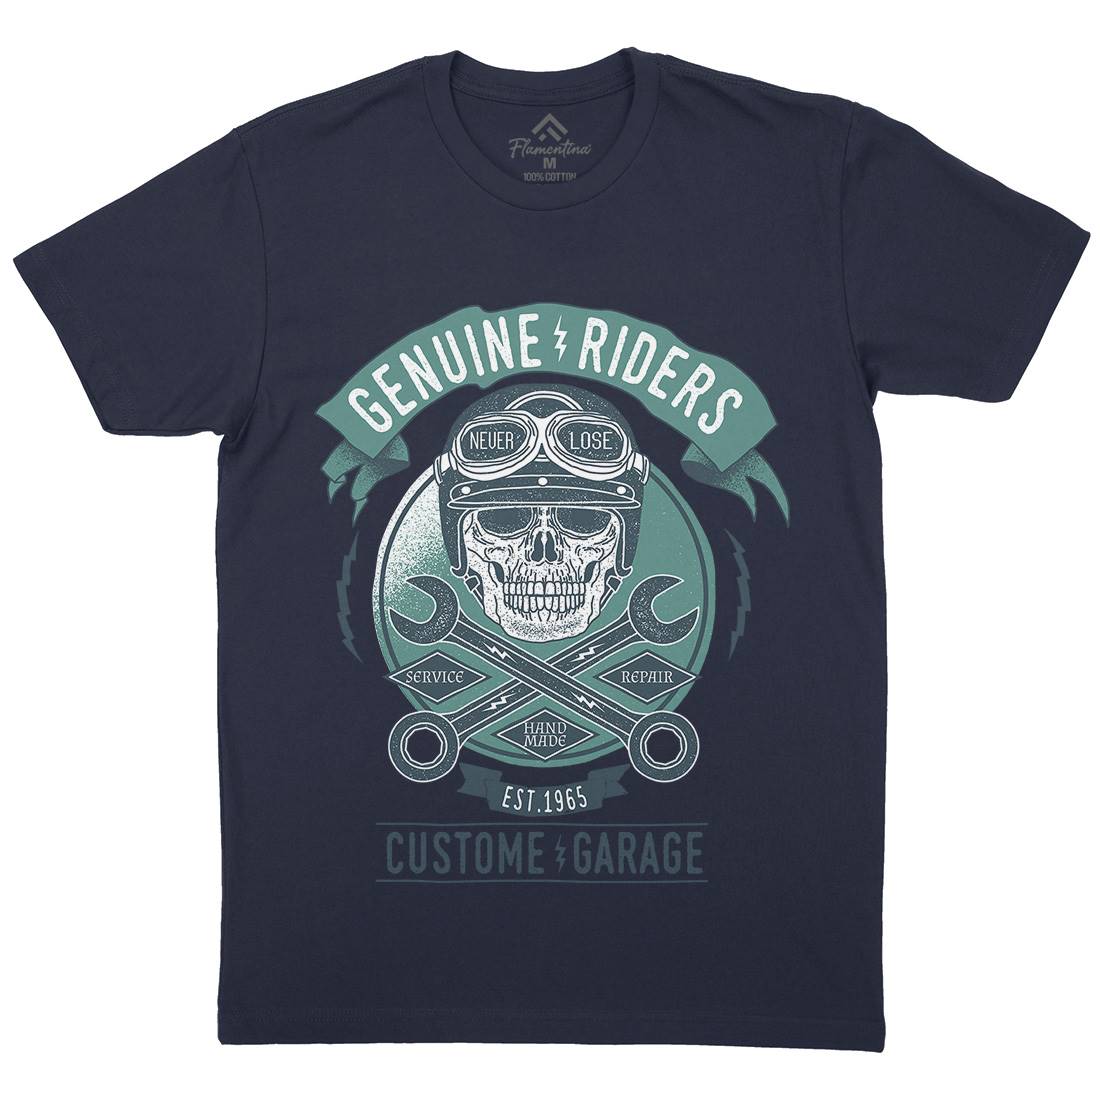 Genuine Riders Mens Organic Crew Neck T-Shirt Motorcycles A984